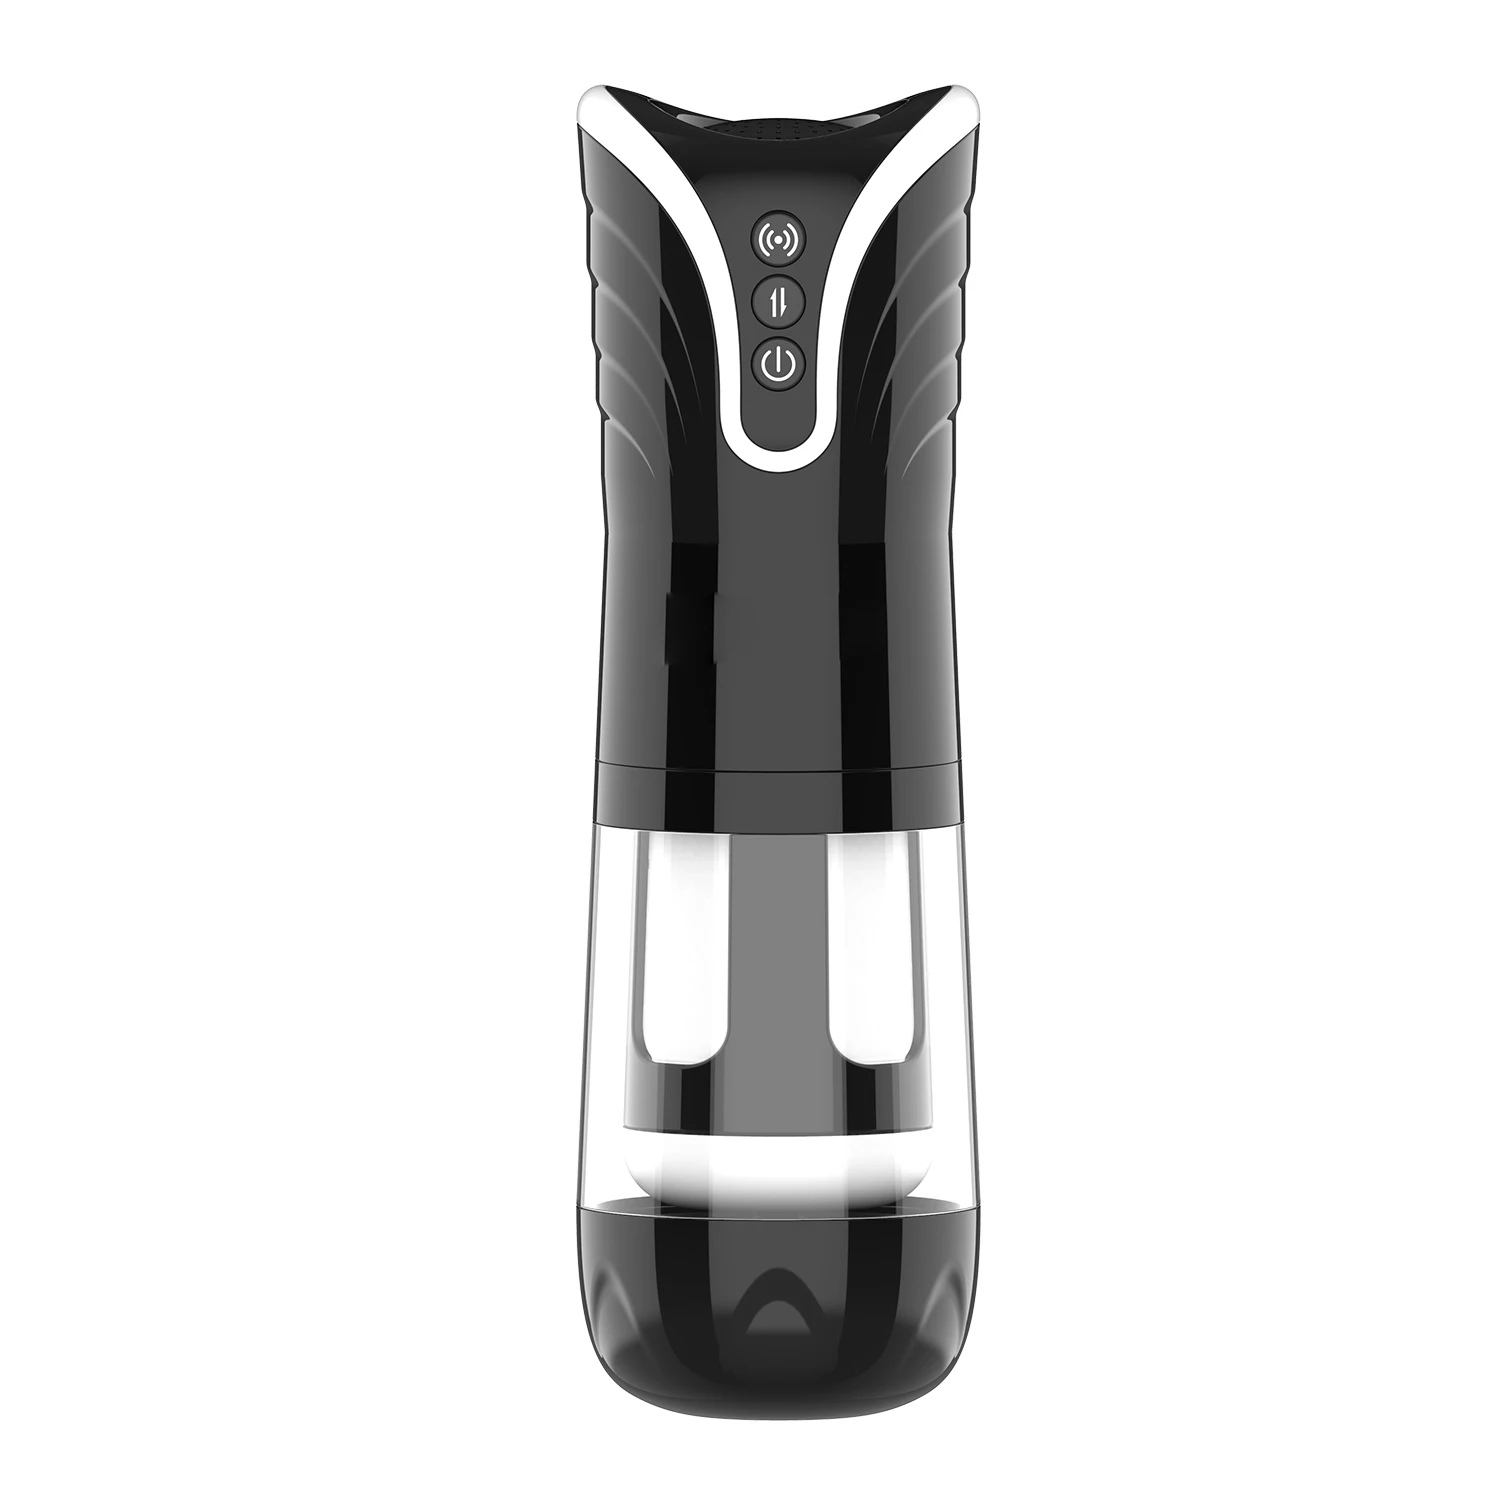 Wholesale Male Masturbation Aircraft Cup Homemade Sex Toys For Men Masturbation Penis With Video From m.alibaba